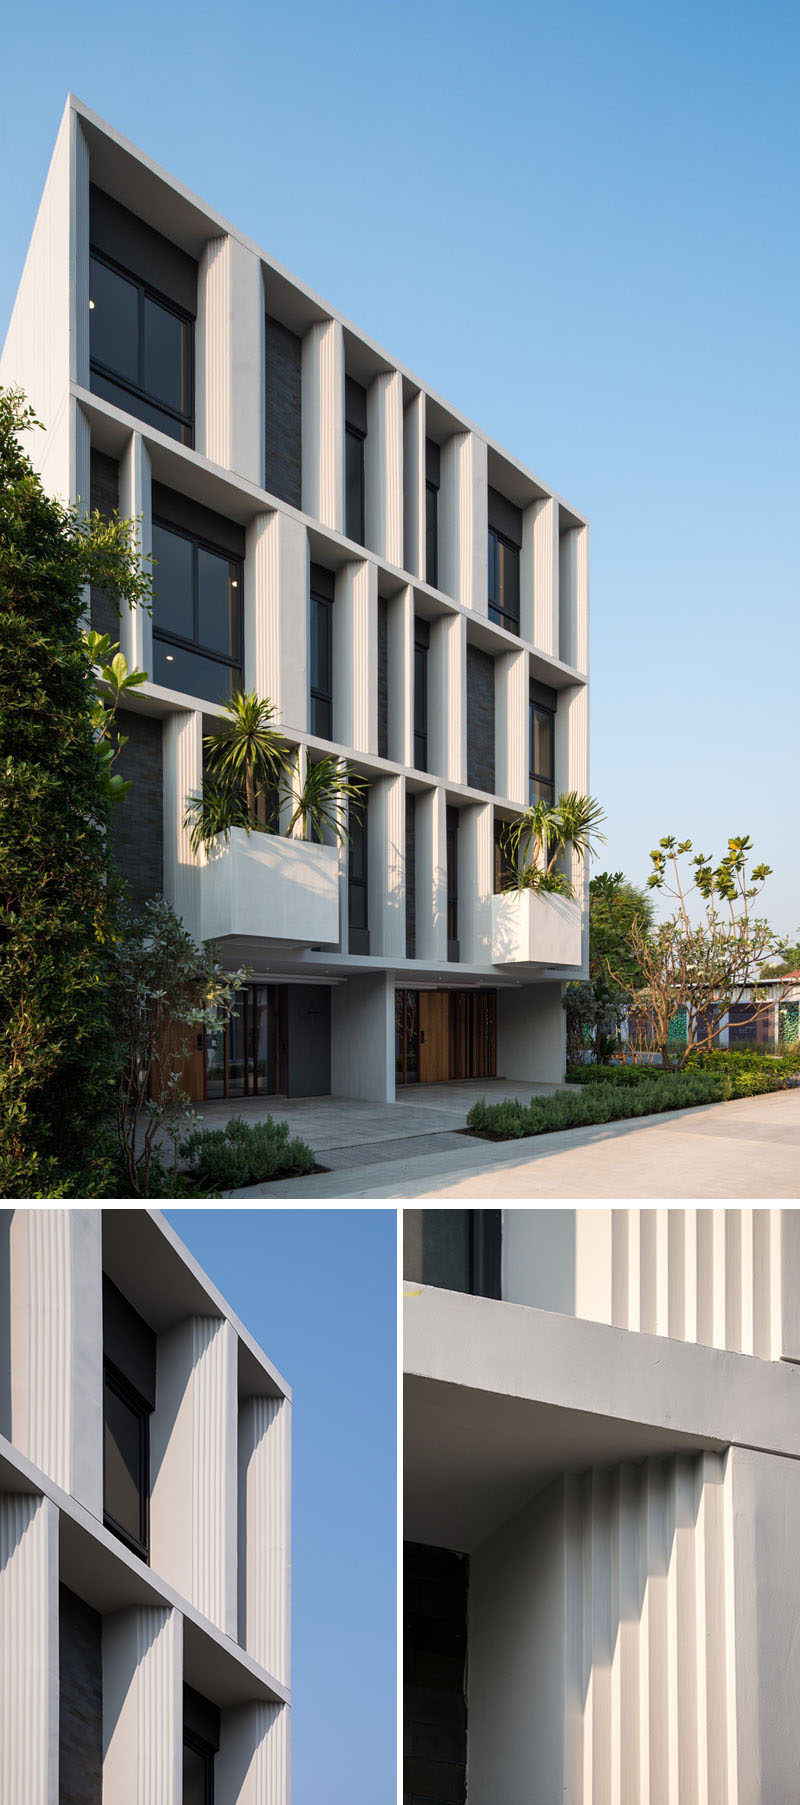 Architecture firm Baan puripuri have recently completed this pair of three storey townhouses in a vibrant neighborhood of Bangkok Thailand.